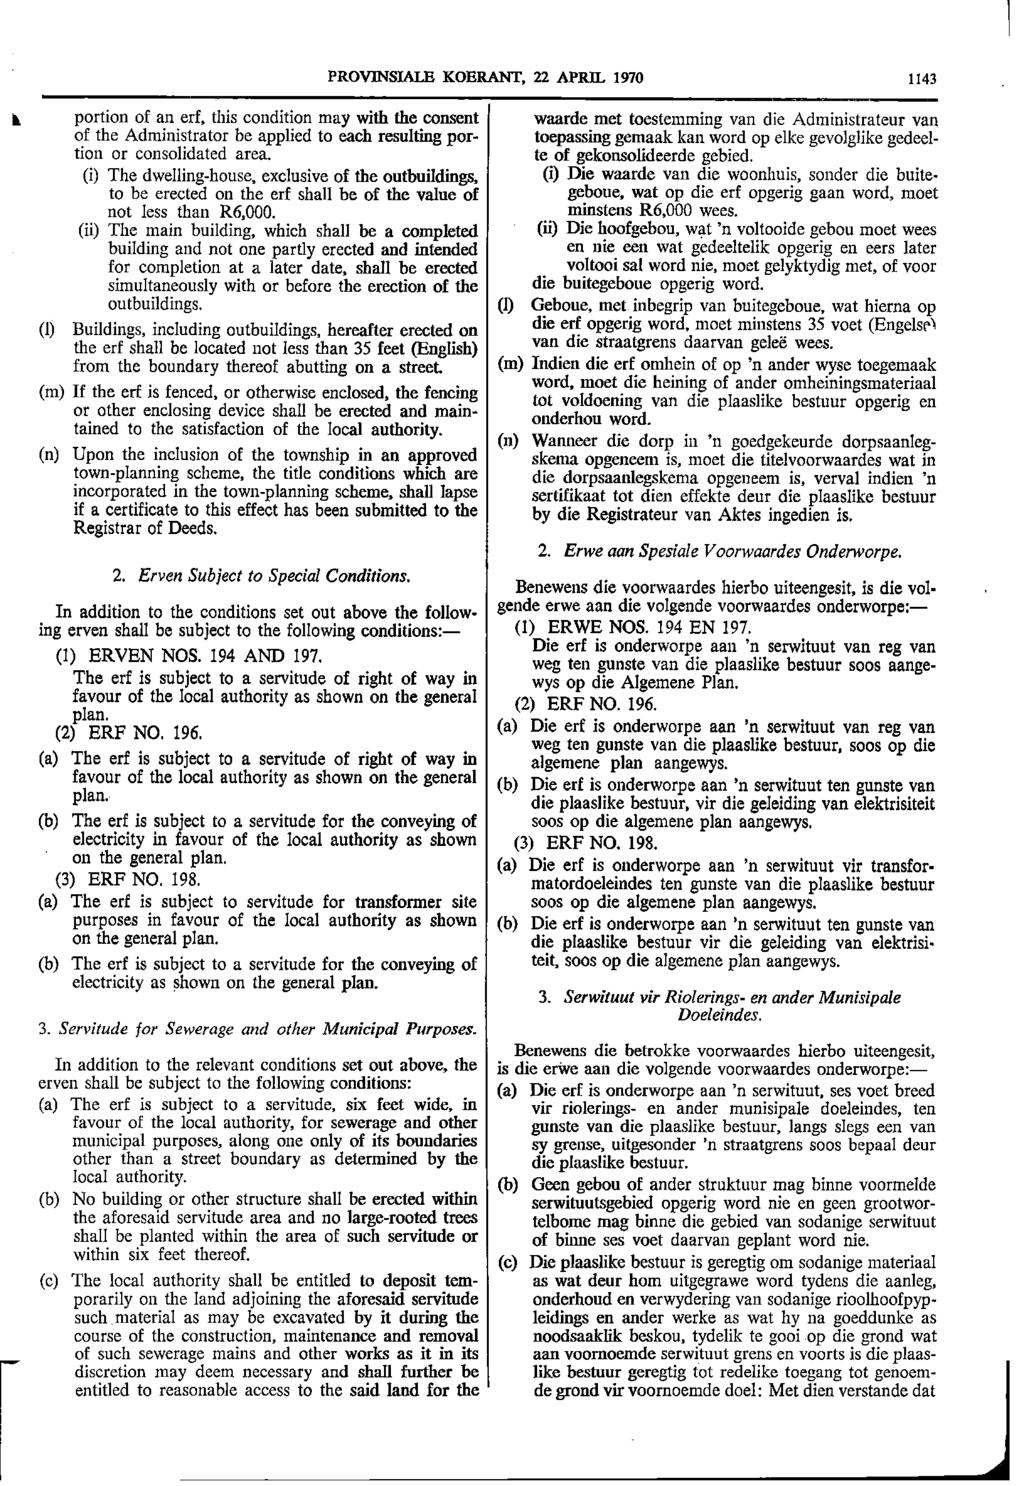 PROVINSIALE KOERANT 22 APRIL 1970 1143 1 portion of an erf this condition may with the consent waarde met toestemming van die Administrateur van of the Administrator be applied to each resulting por